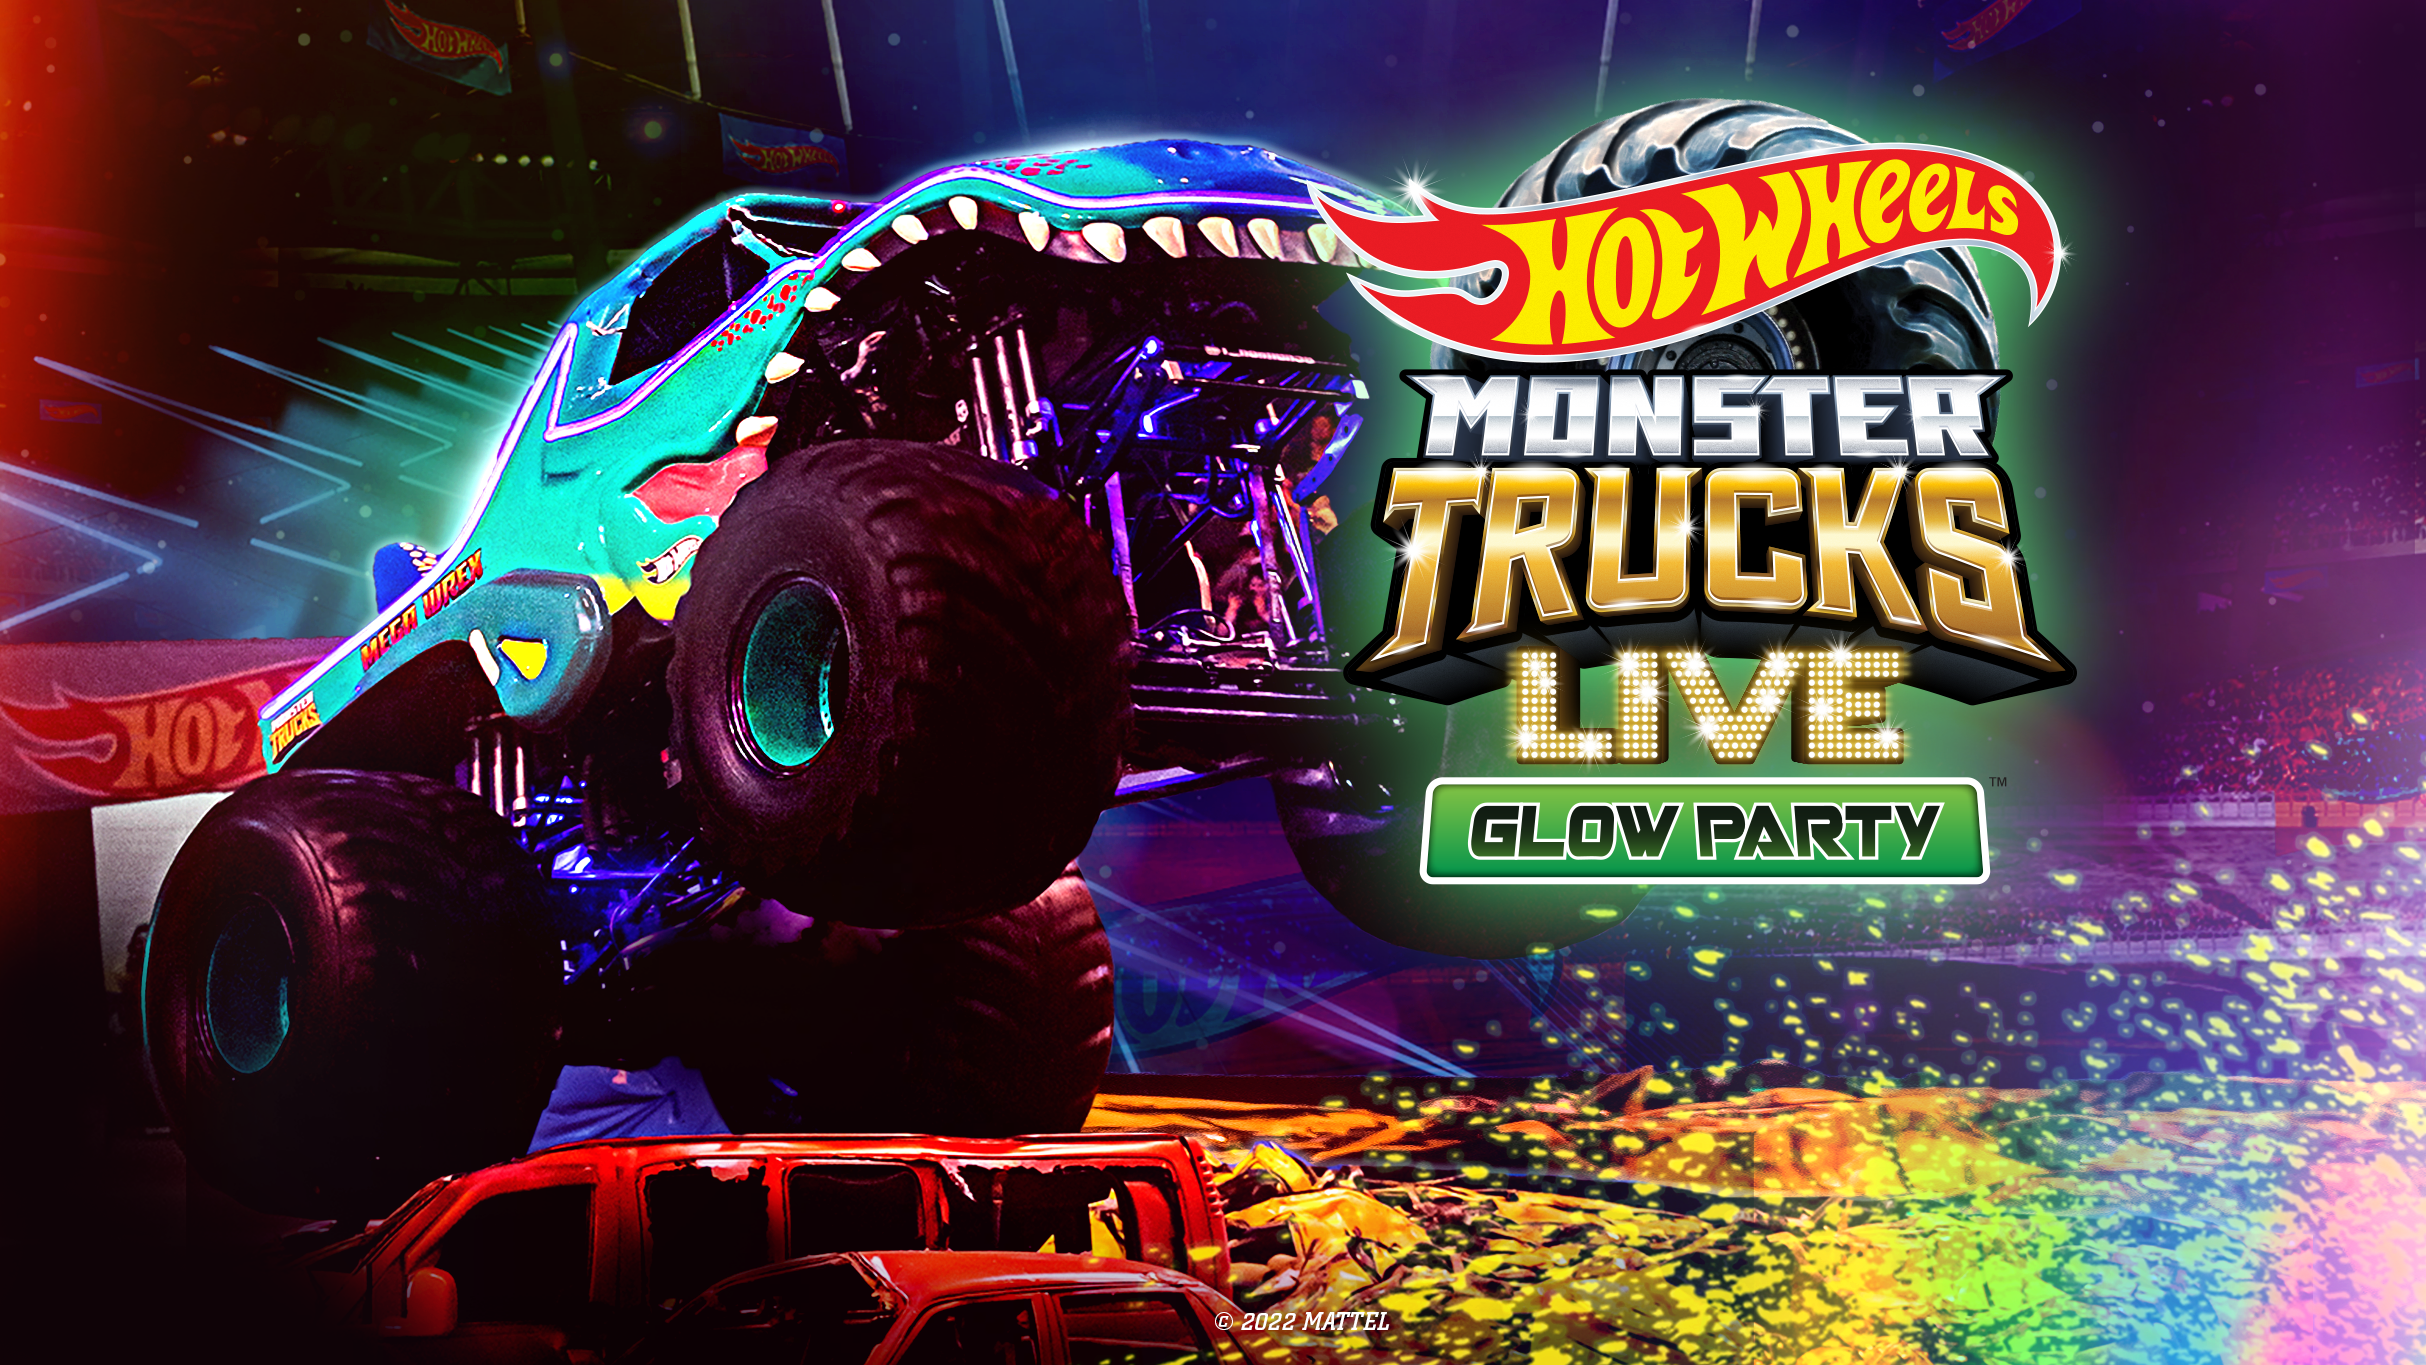 new presale password for Hot Wheels Monster Trucks Live Glow Party affordable tickets in San Antonio